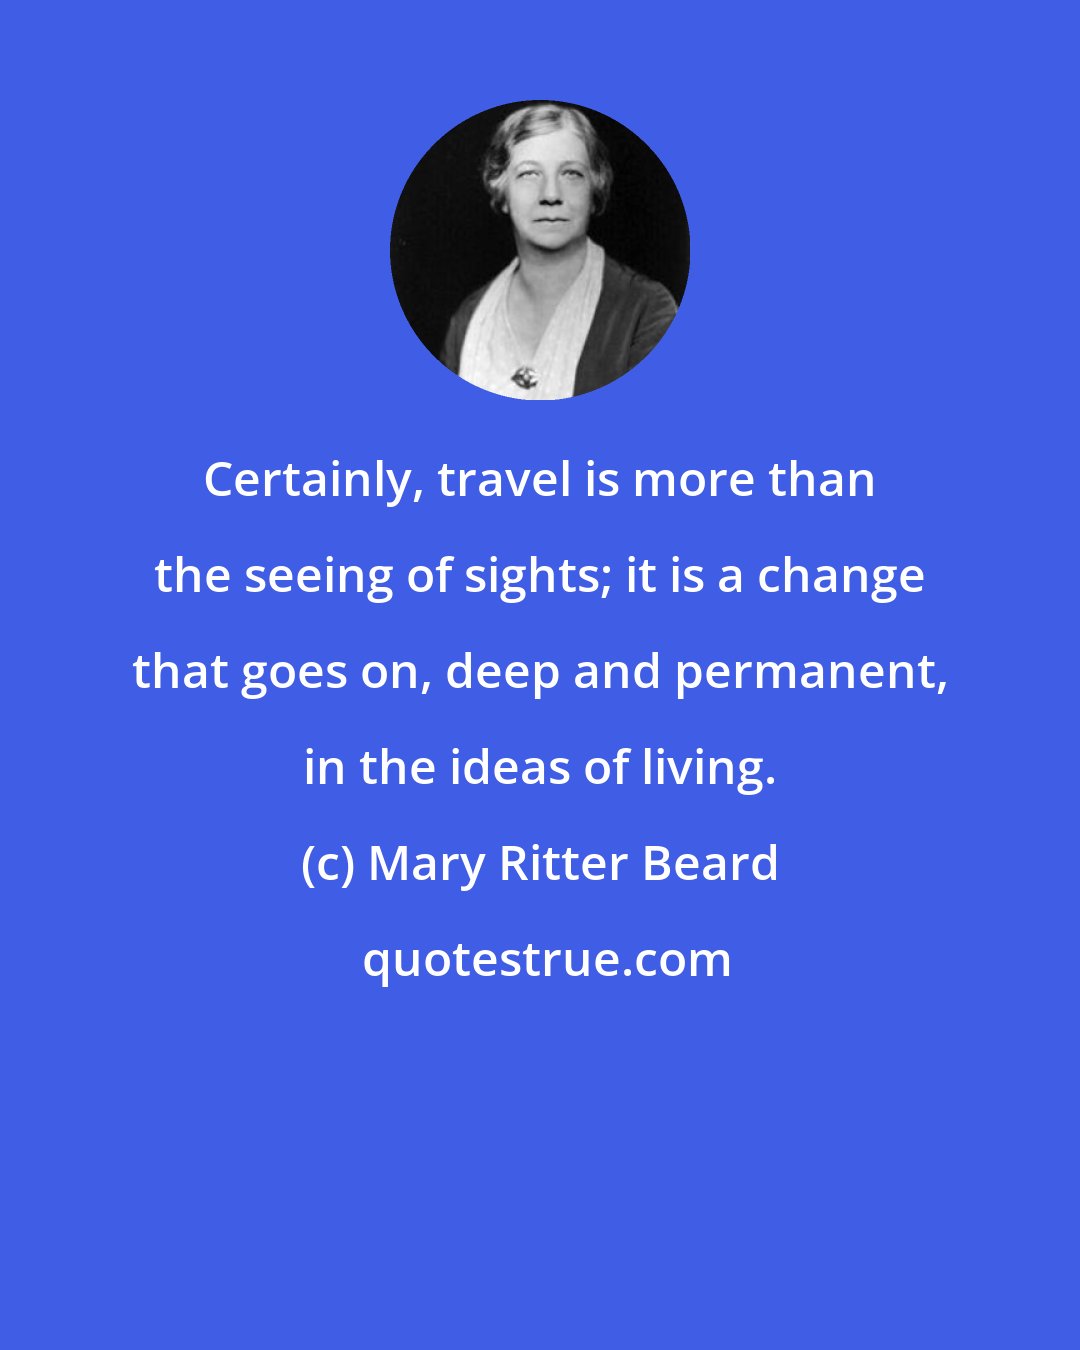 Mary Ritter Beard: Certainly, travel is more than the seeing of sights; it is a change that goes on, deep and permanent, in the ideas of living.